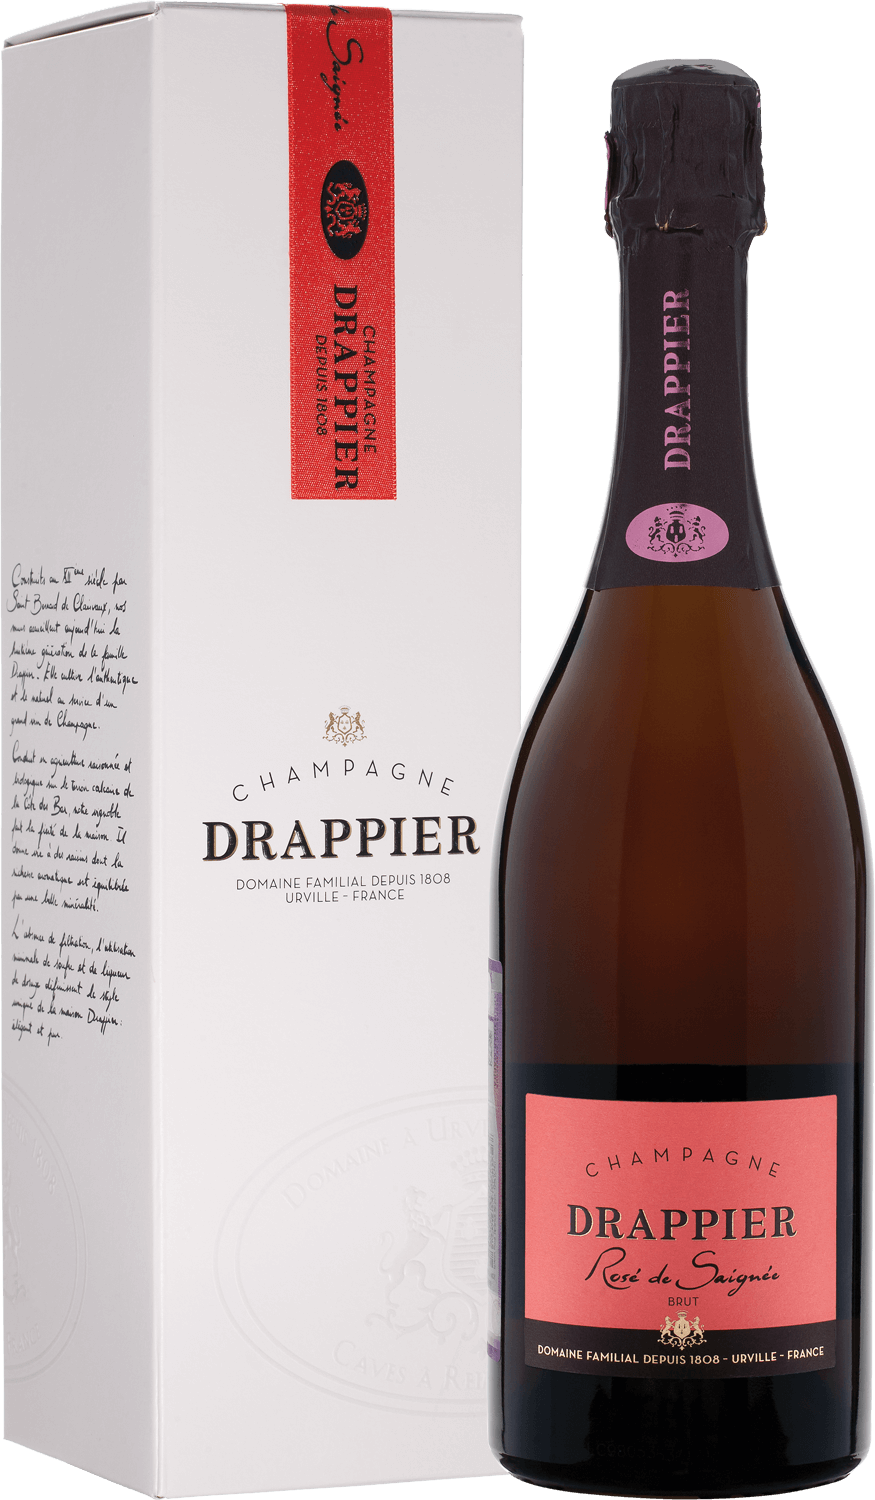 Drappier Brut Rose Champagne AOP in gift box drappier clarevallis champagne aoc gift box